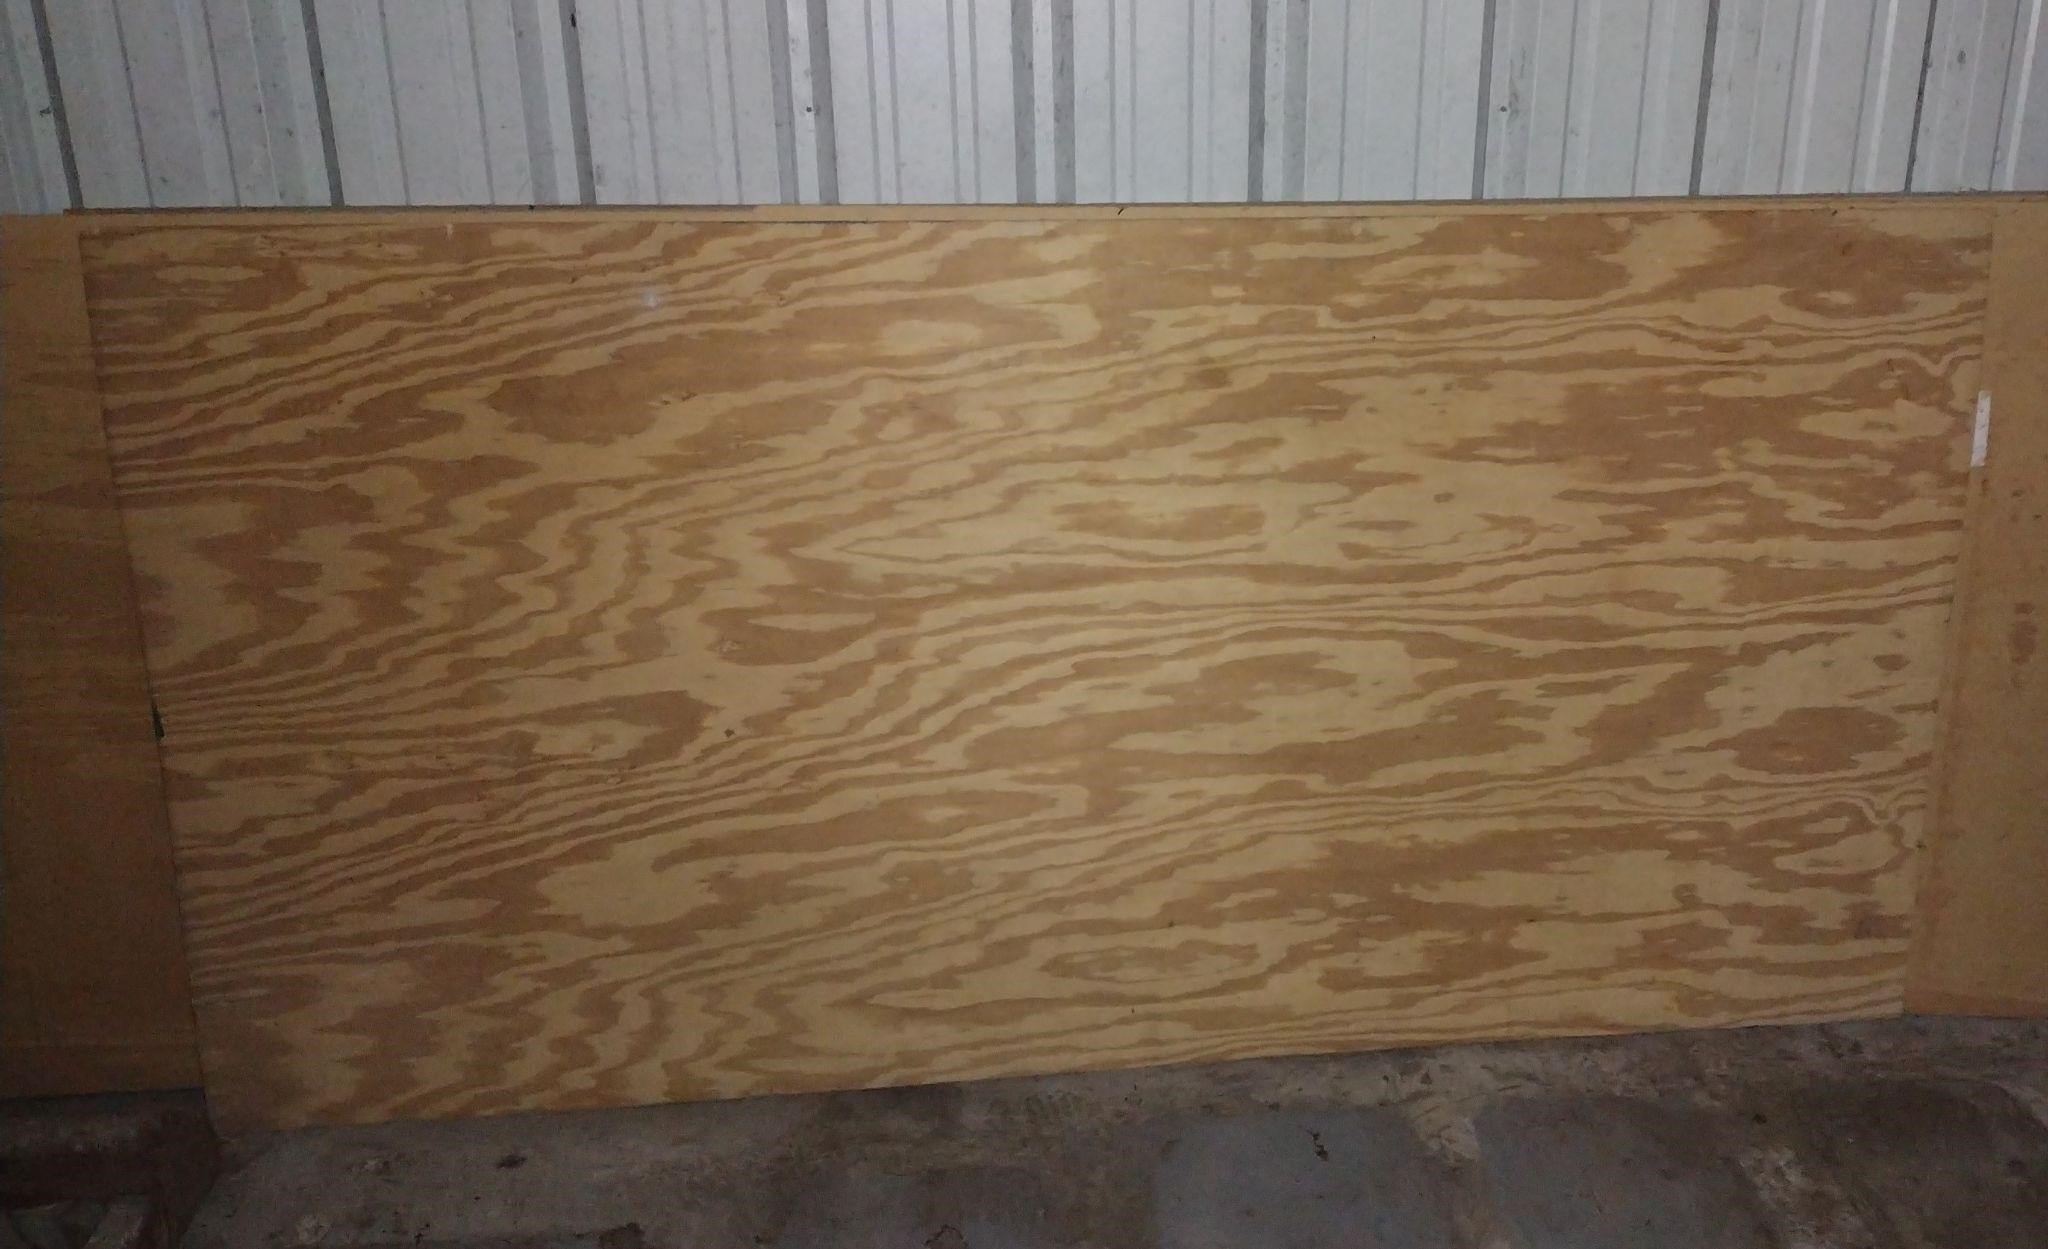 1 Piece Plywood 1/4" and 4 x 8 Foot!